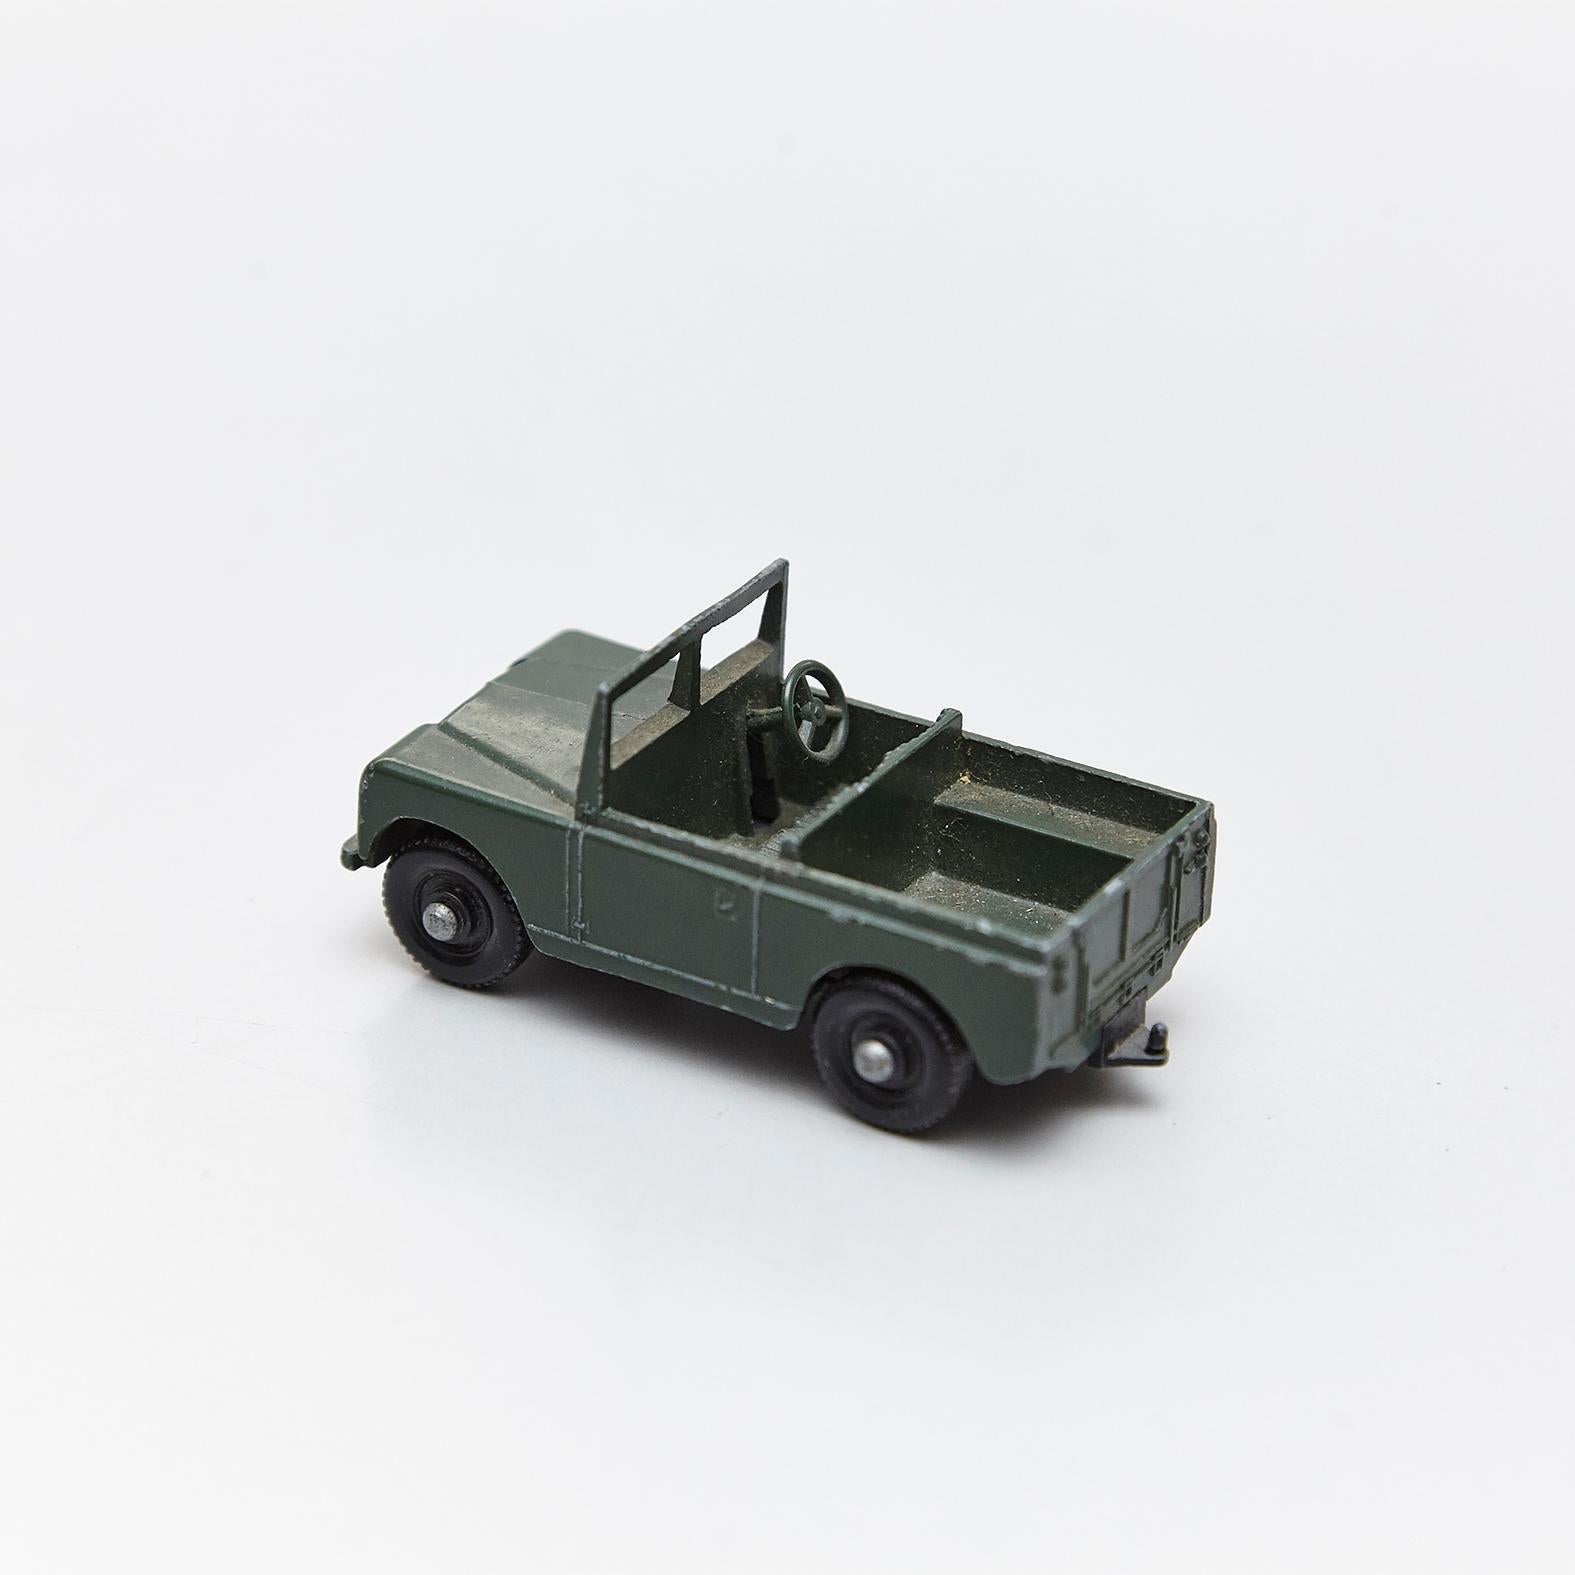 Modern Lesney Matchboxes Series Antique Metal Toy Cars Green Military, Free Shipping